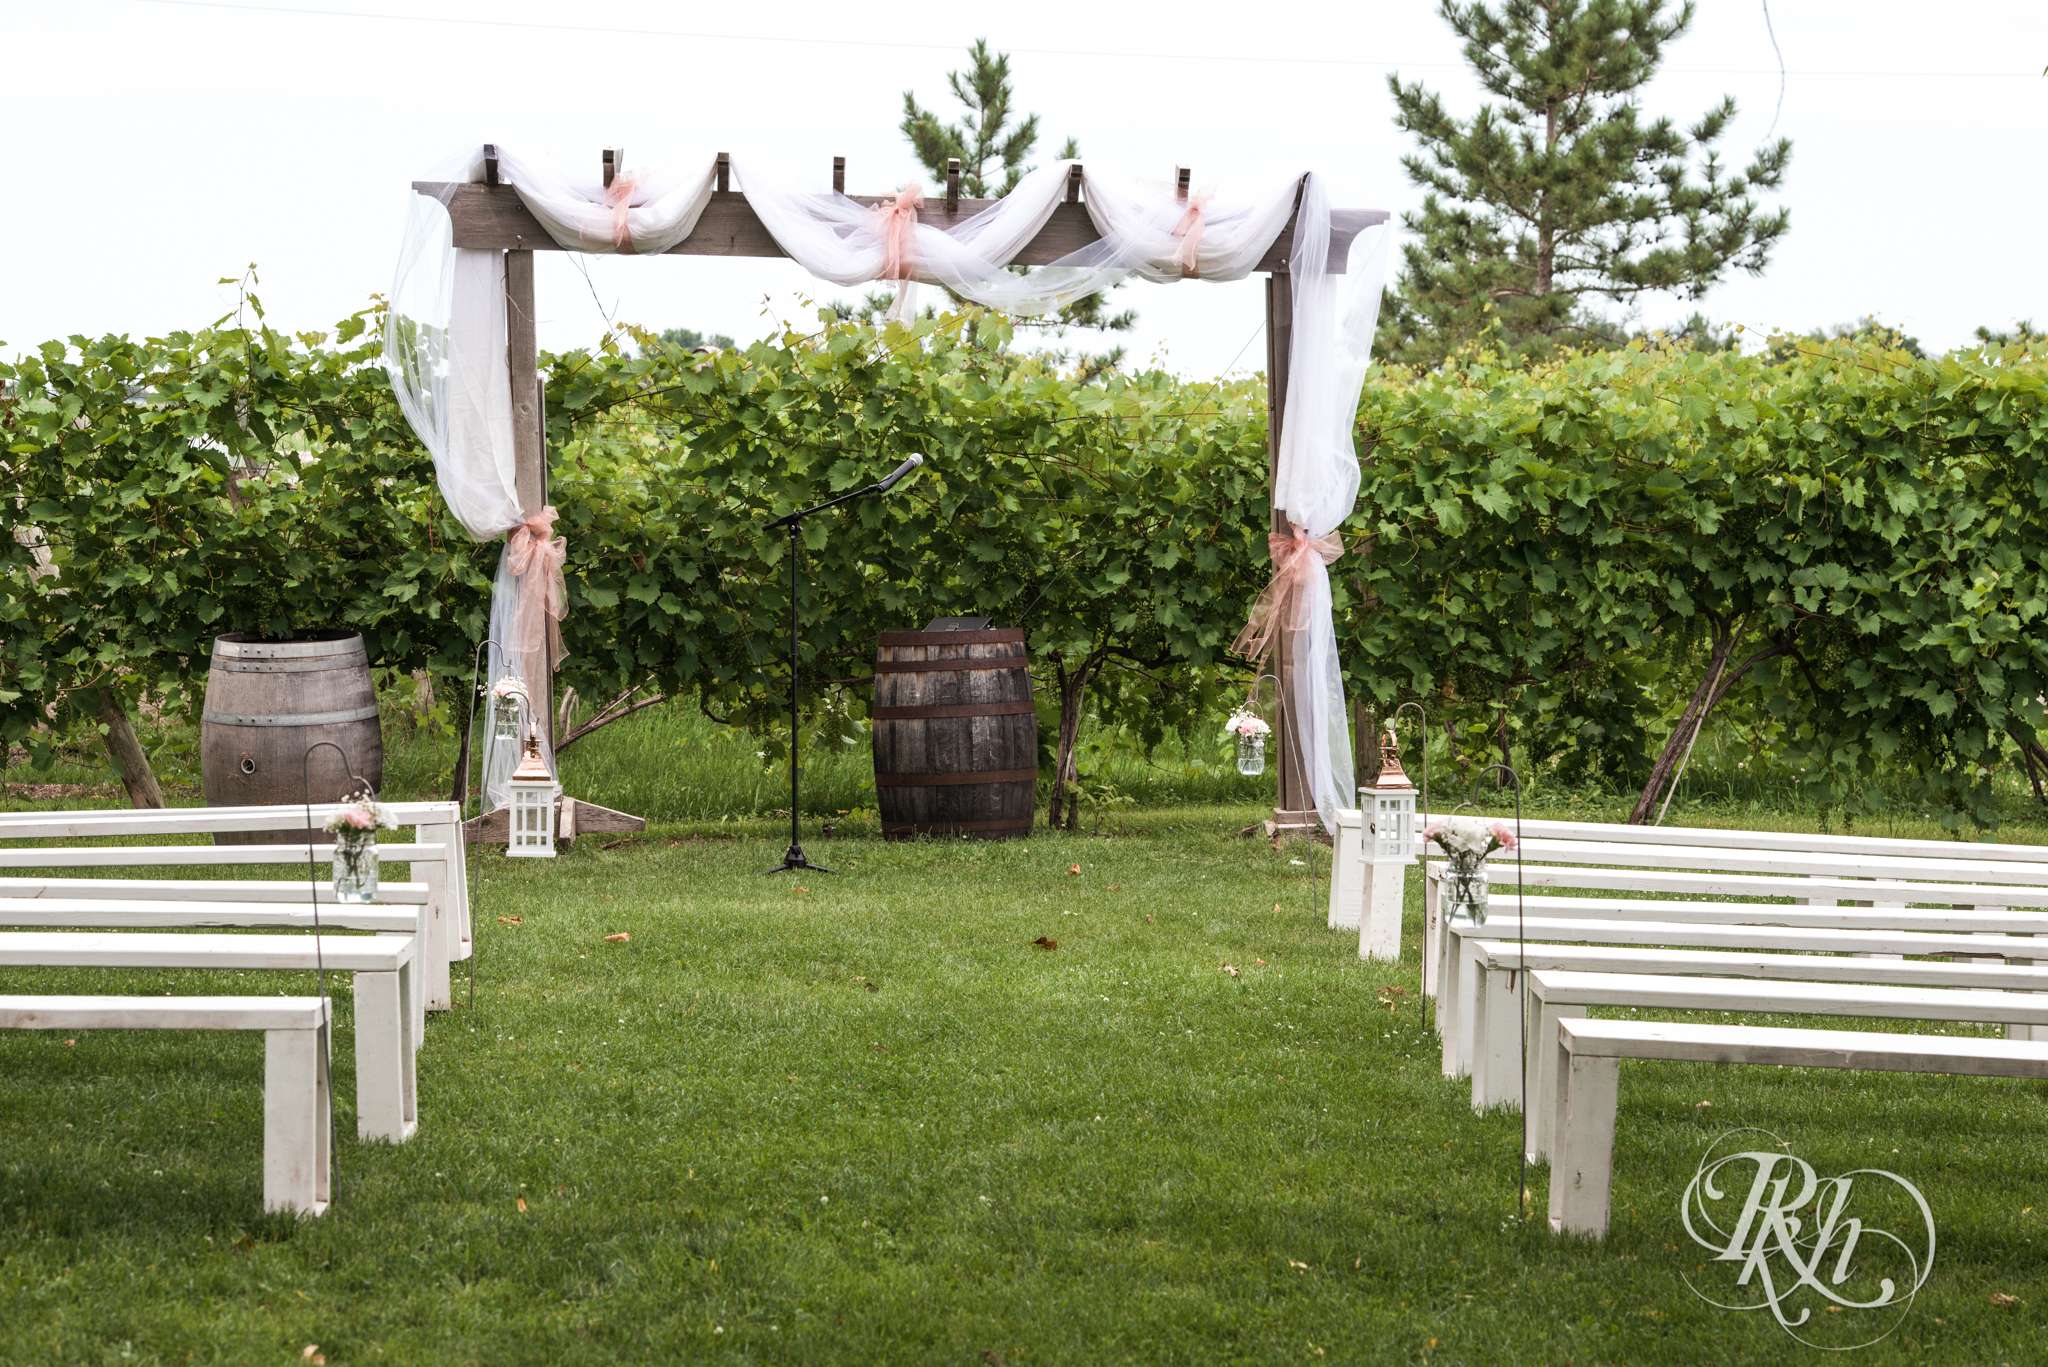 Outdoor summer wedding ceremony setup at Next Chapter Winery in New Prague, Minnesota.